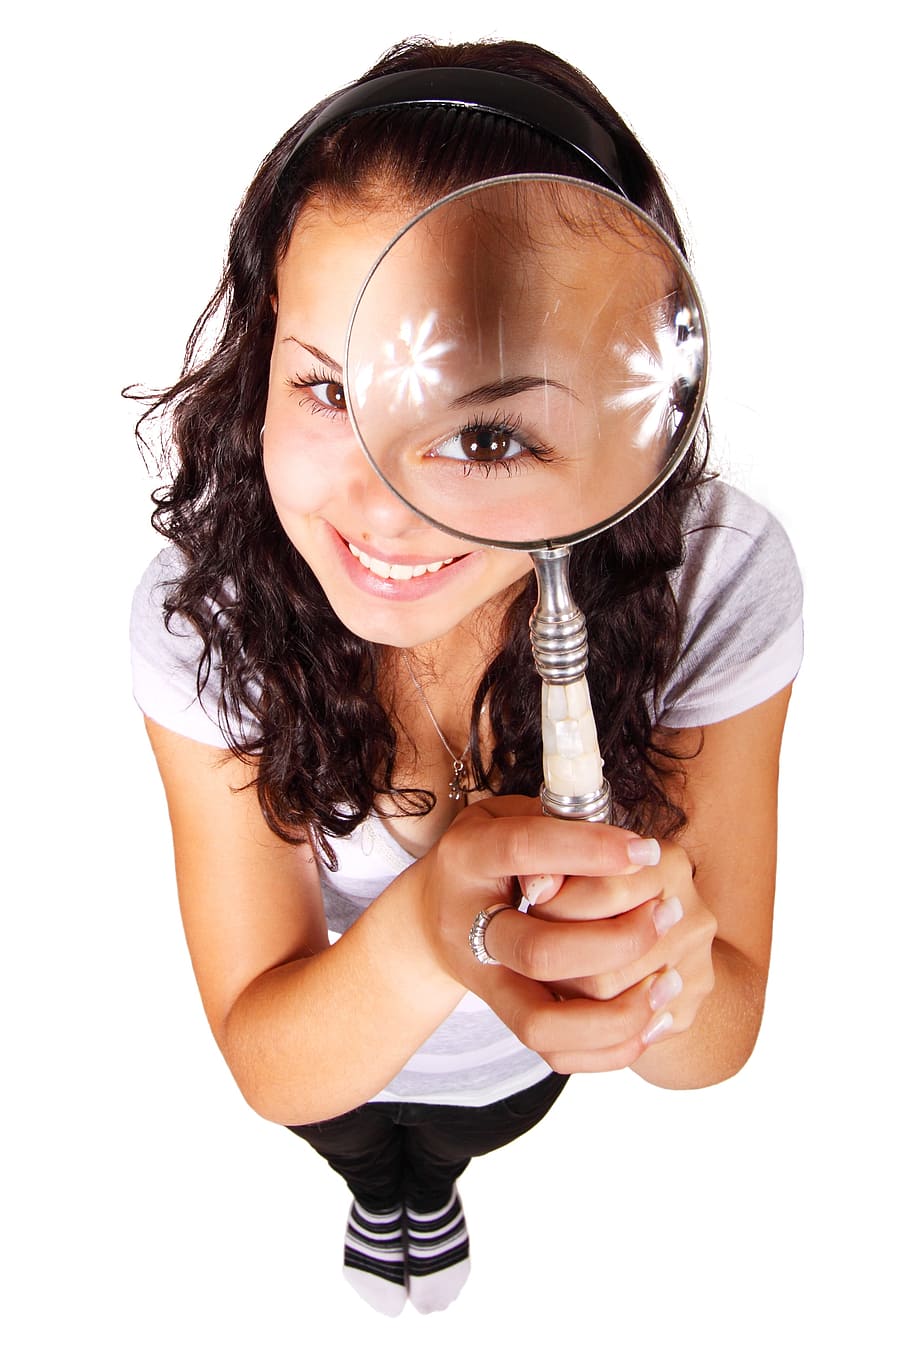 woman, scoop neck shirt, holding, magnifying, glass, woman in white, white top, magnifying glass, eye, female